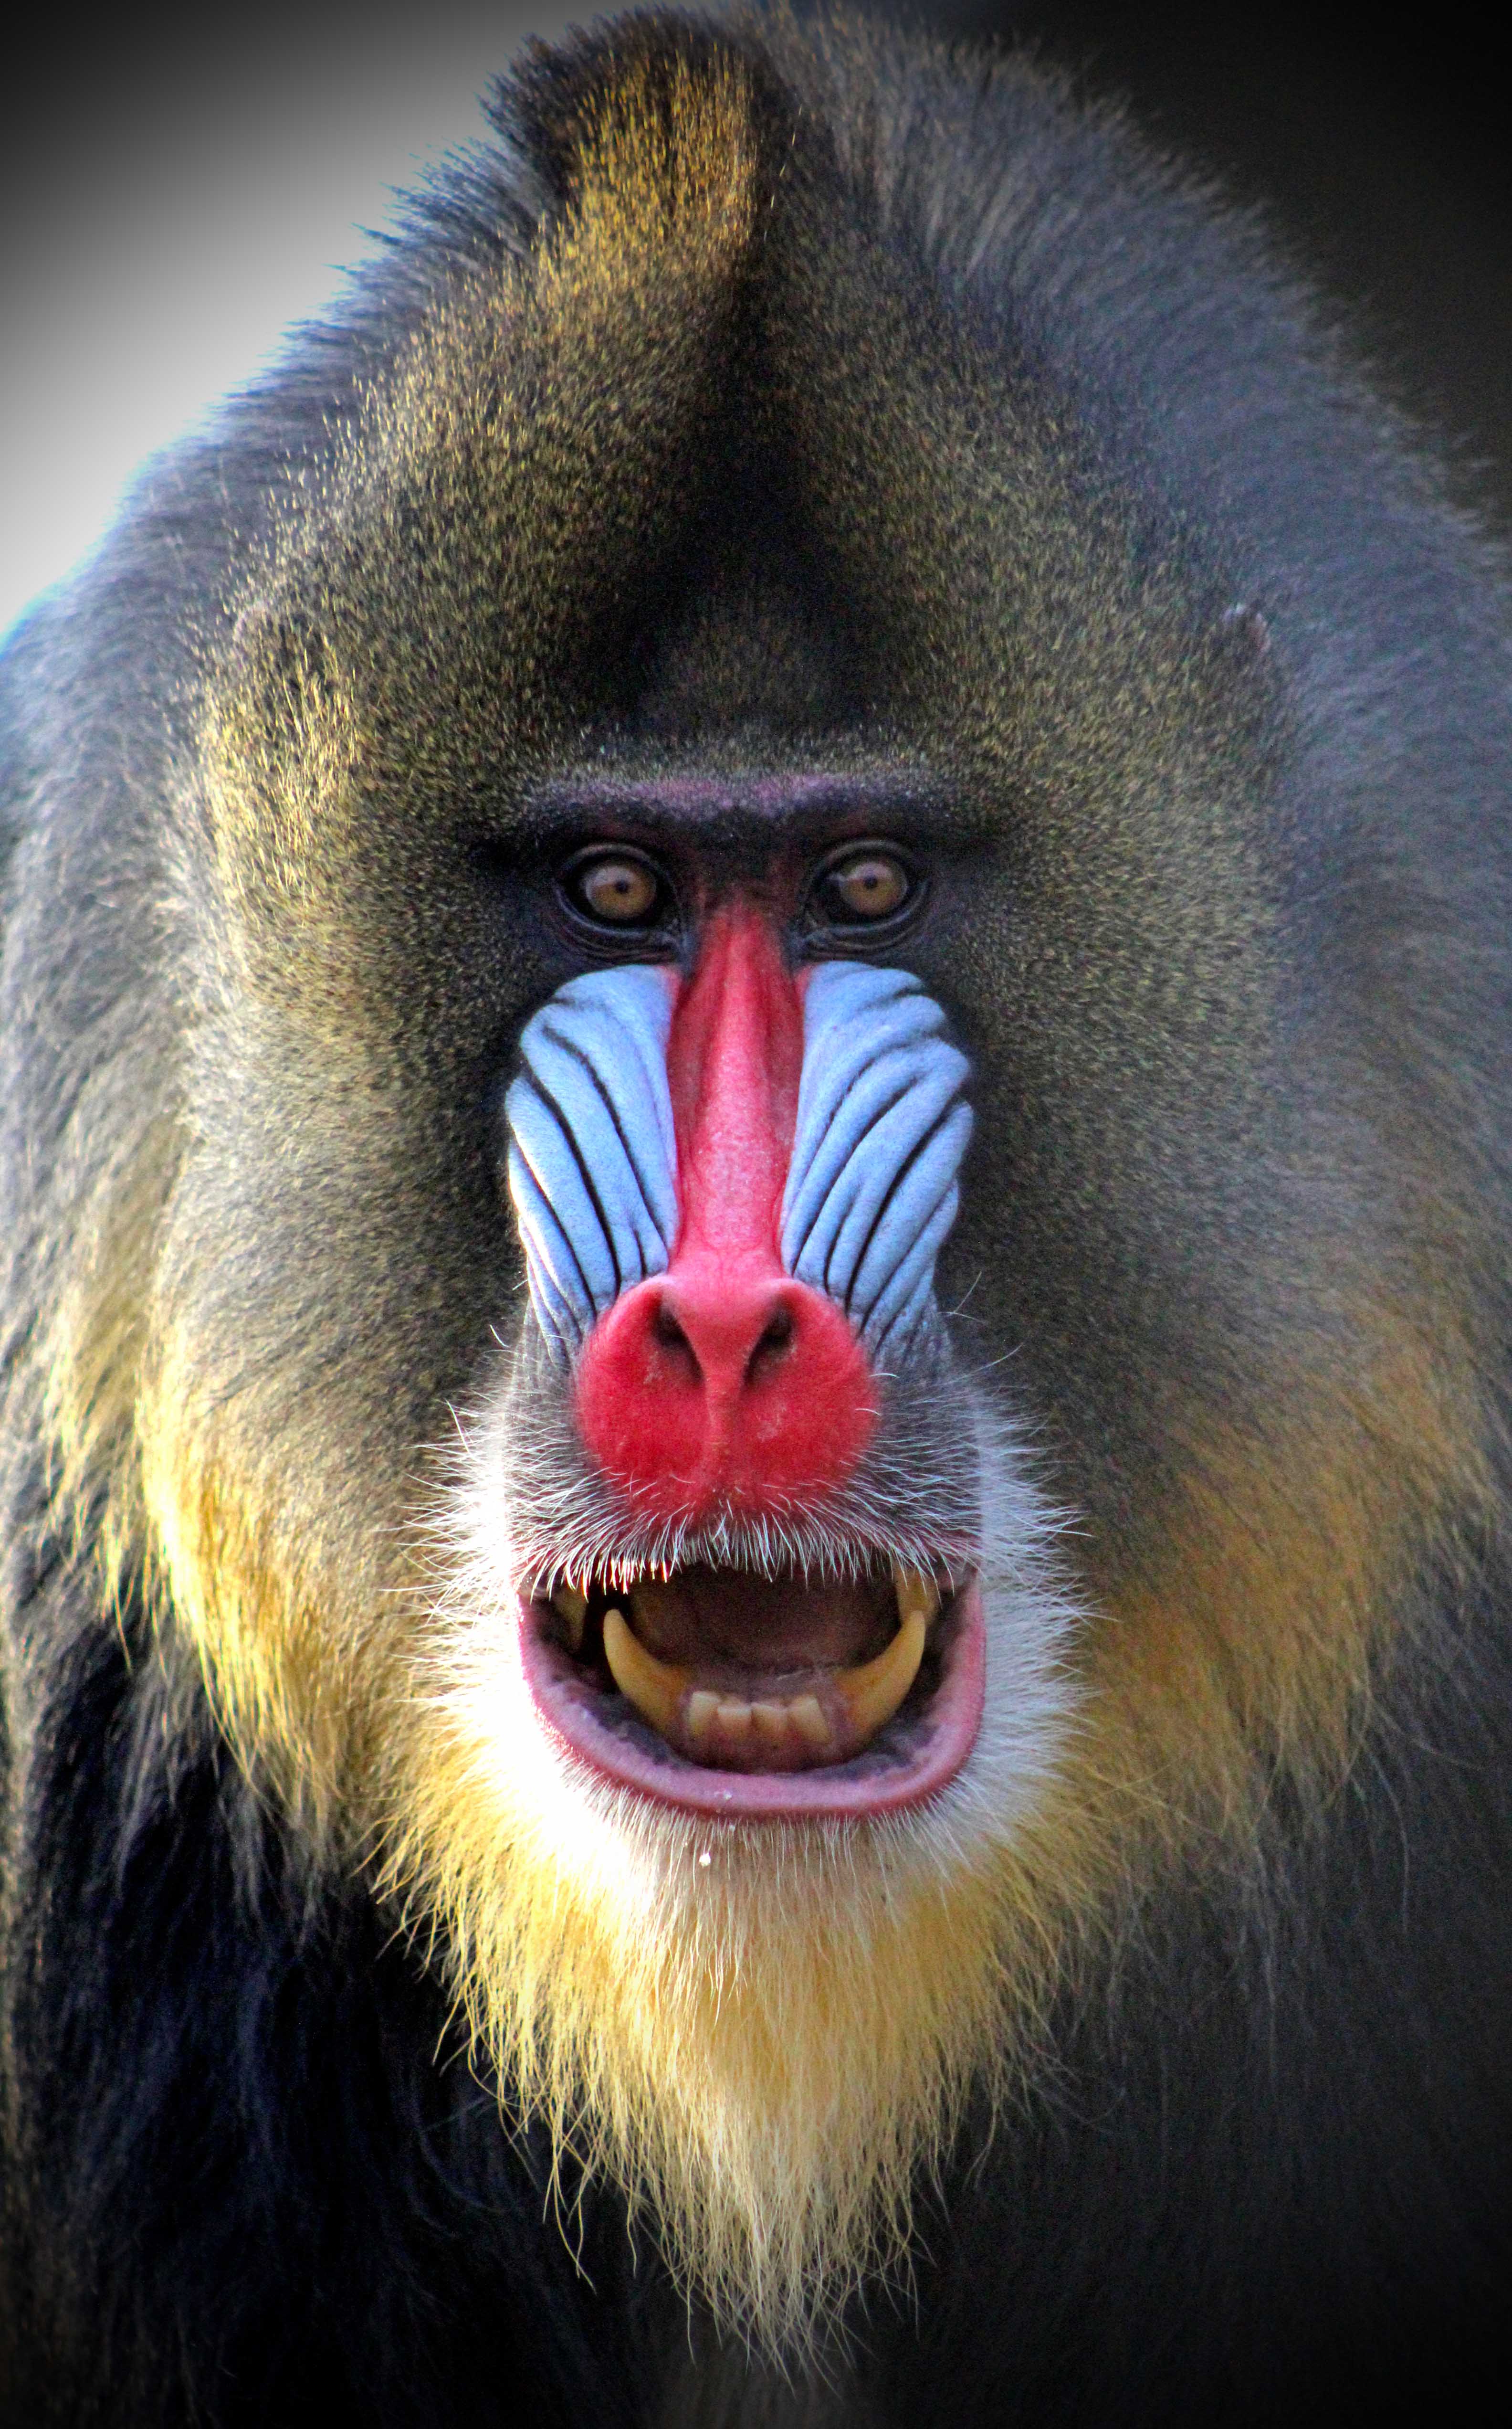 Is a mandrill friendly?